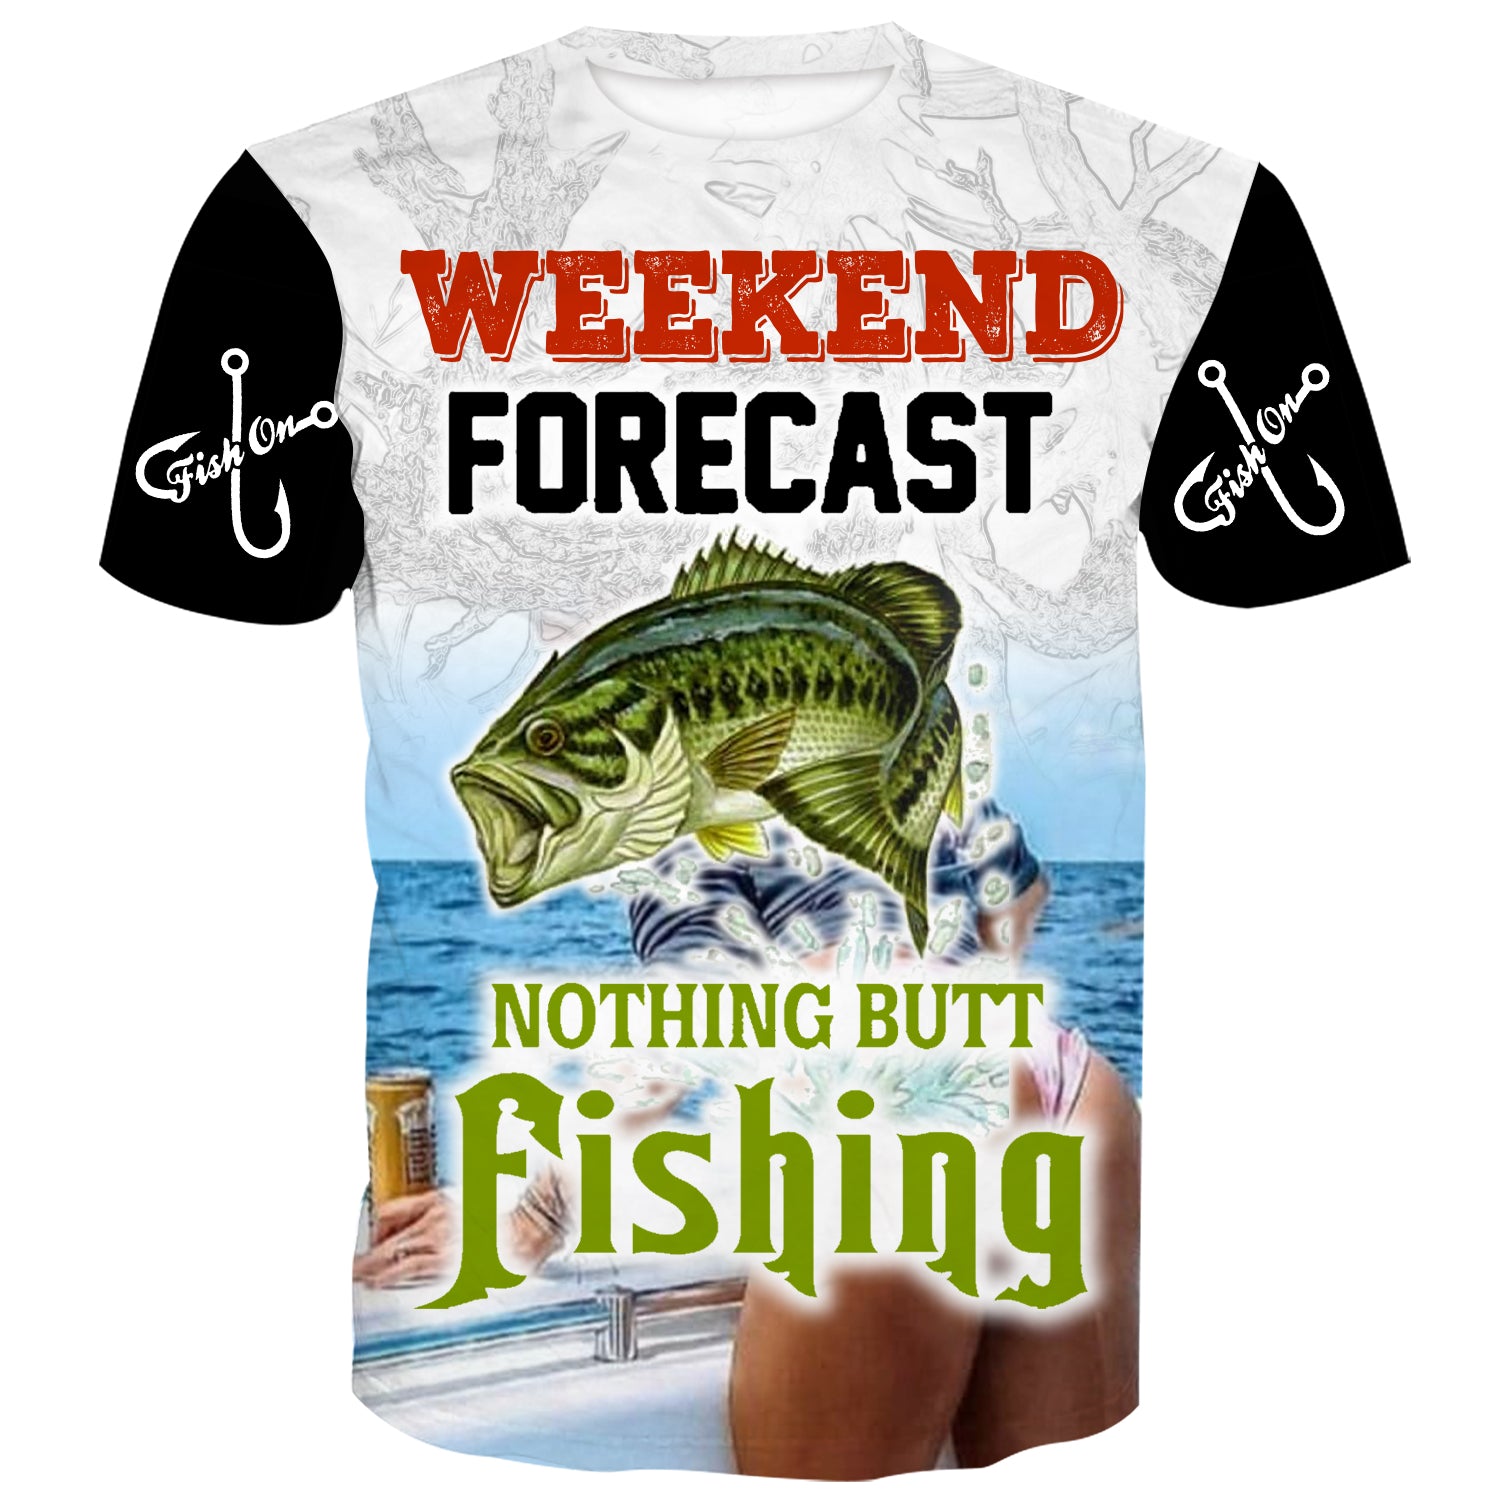 A fishing t-shirt that has a picture of a bass and a girl, and the text “Weekend forecast: nothing butt fishing”: Funny bass fishing shirt with a clever pun